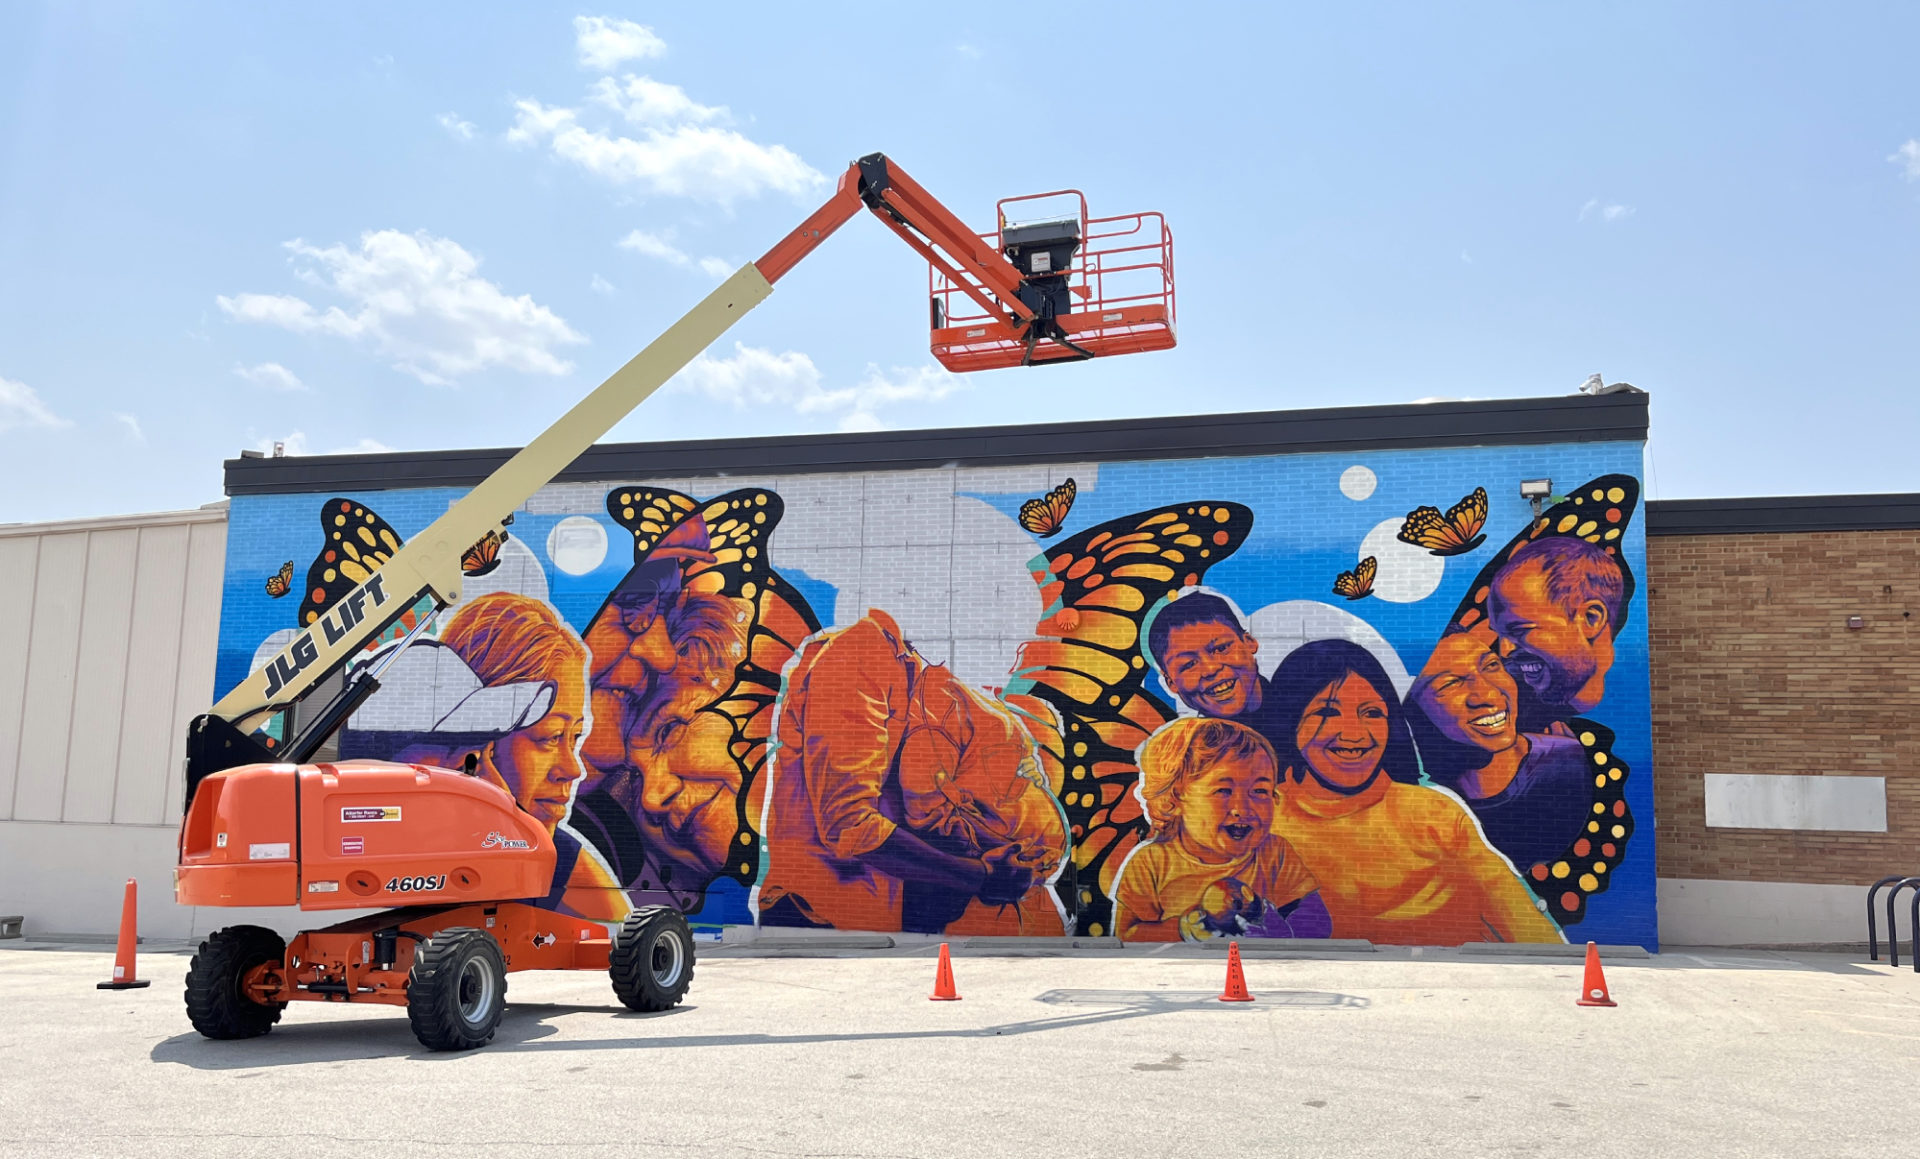 An in-progress mural at Champaign Urbana Public Health District by Jose Vazquez. It features 11 different people, all painted among and the colors of monarch butterflies. There are orange cones and a large cherry picker parked in front.